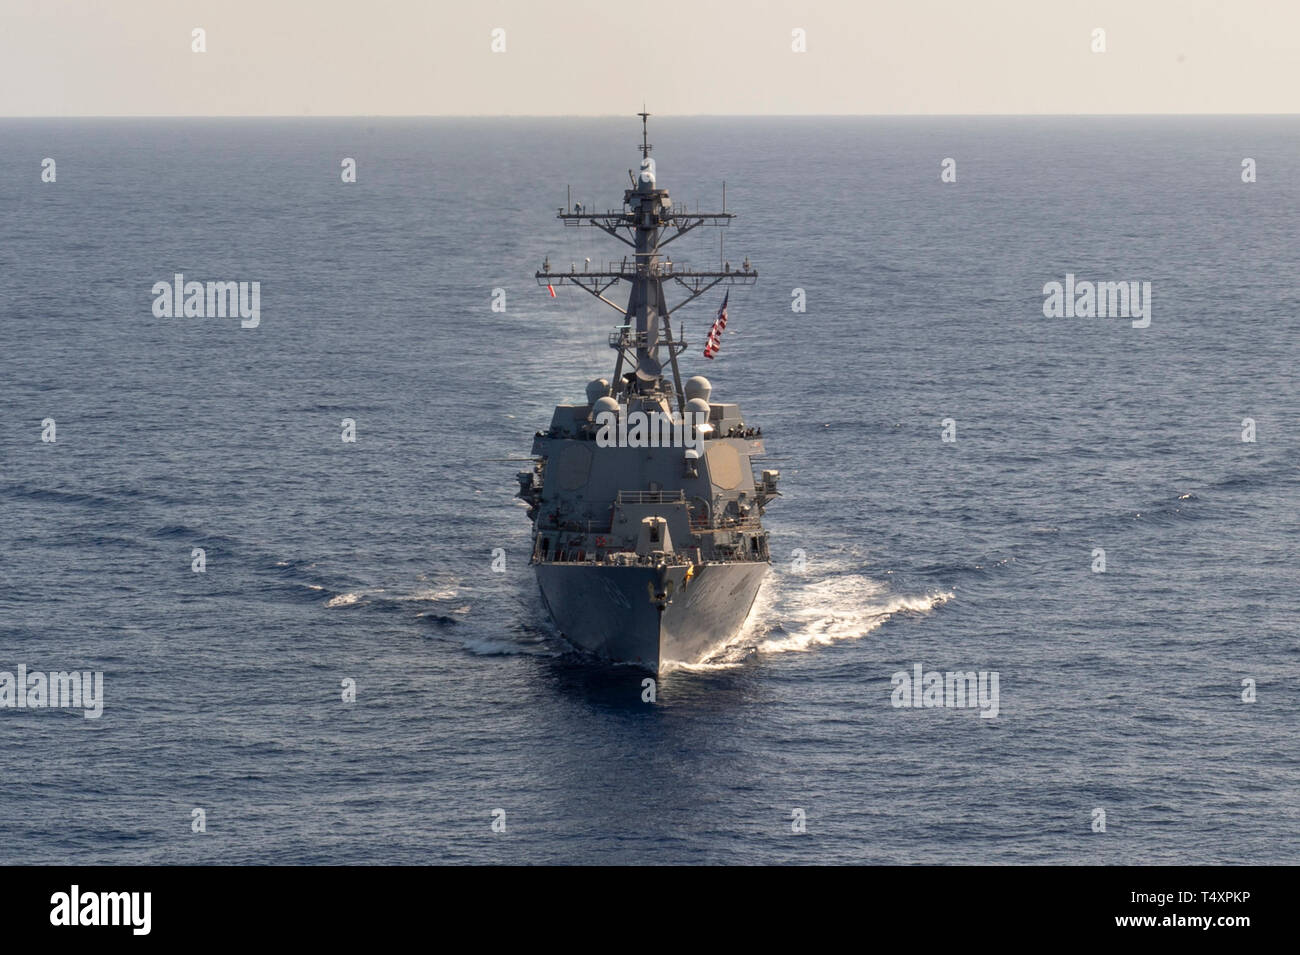 190418-N-UI104-0391     PHILIPPINE SEA (April 18, 2019) The Arleigh Burke-class guided-missile destroyer USS Preble (DDG 88) steams through the water during a cooperative deployment. Preble is participating with the Royal Australian Navy Adelaide-class guided-missile frigate HMAS Melbourne (FFG 05) in a cooperative deployment in order to improve on maritime capabilities between partners.  Preble is deployed to the U.S 7th Fleet area of operations in support of security and stability in the Indo-Pacific region. (U.S. Navy photo by Mass Communication Specialist 1st Class Bryan Niegel/Released) Stock Photo